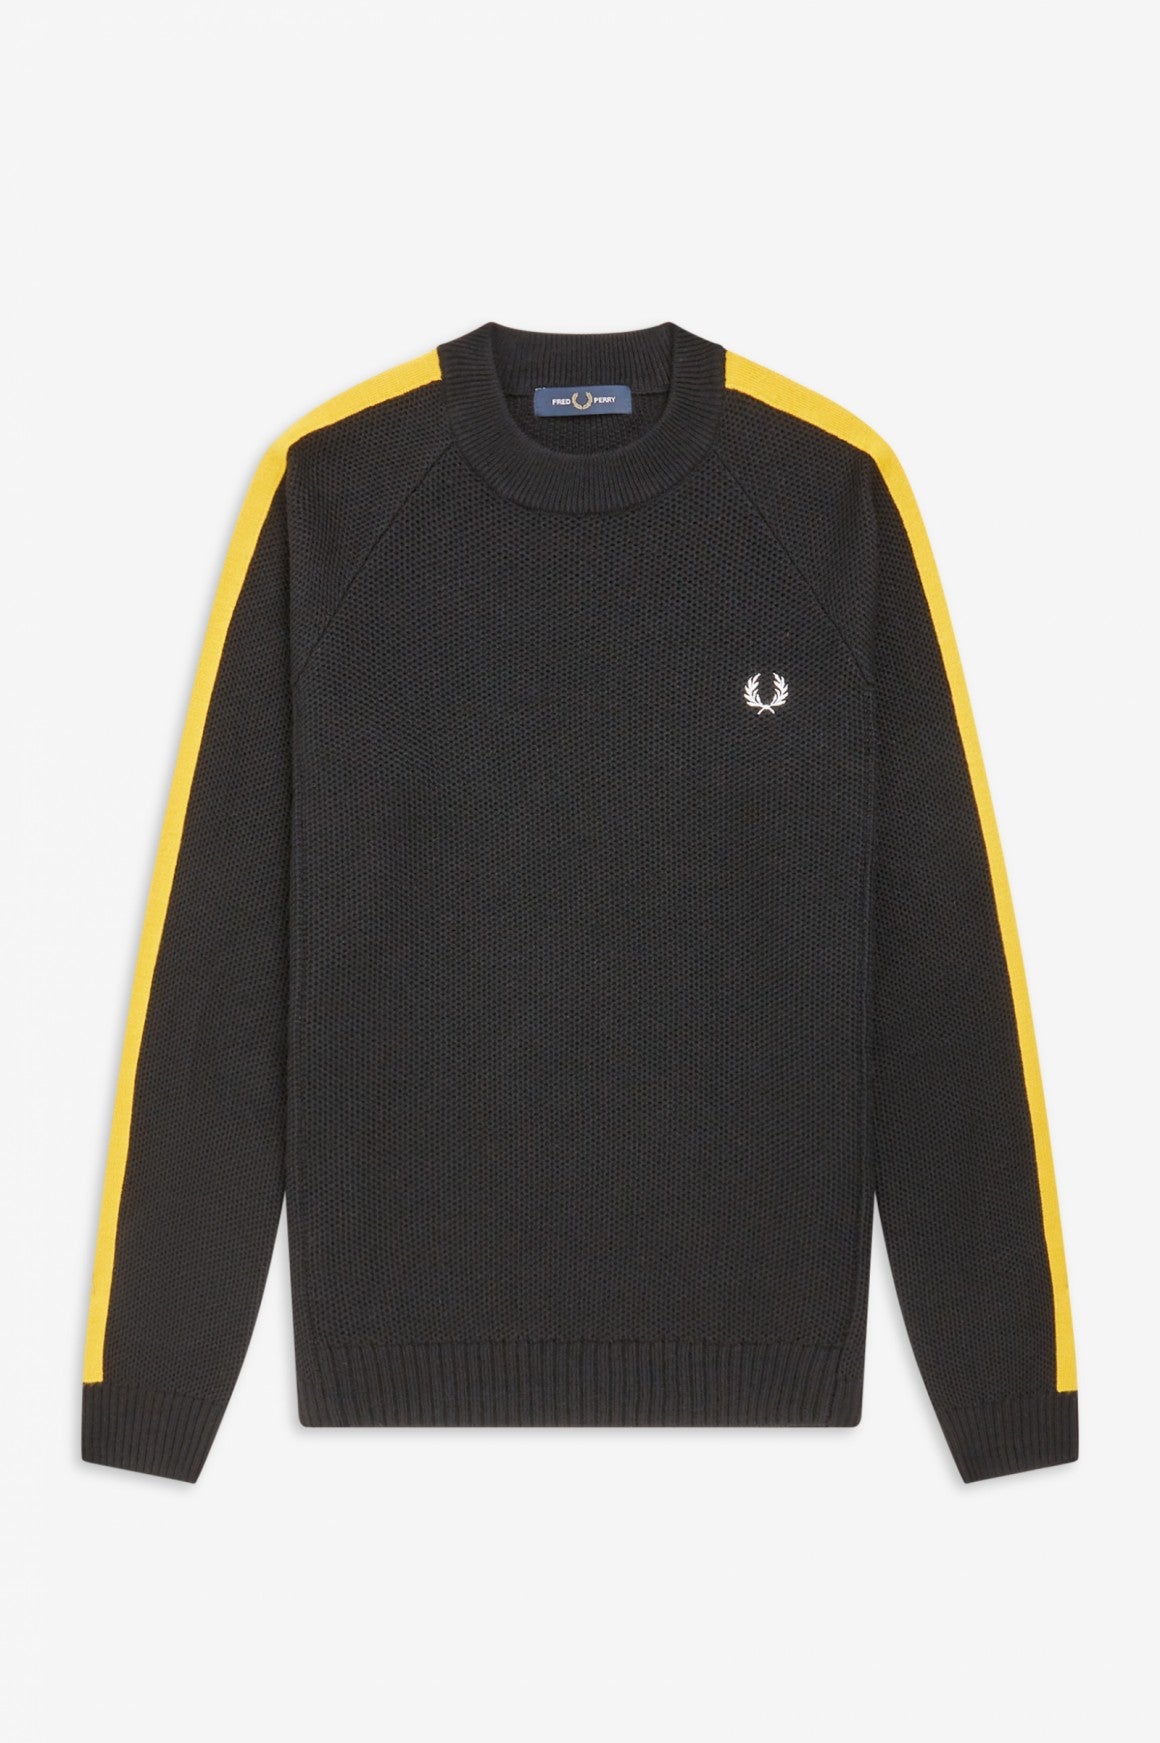 Tipped Sleeve Crew Neck Jumper